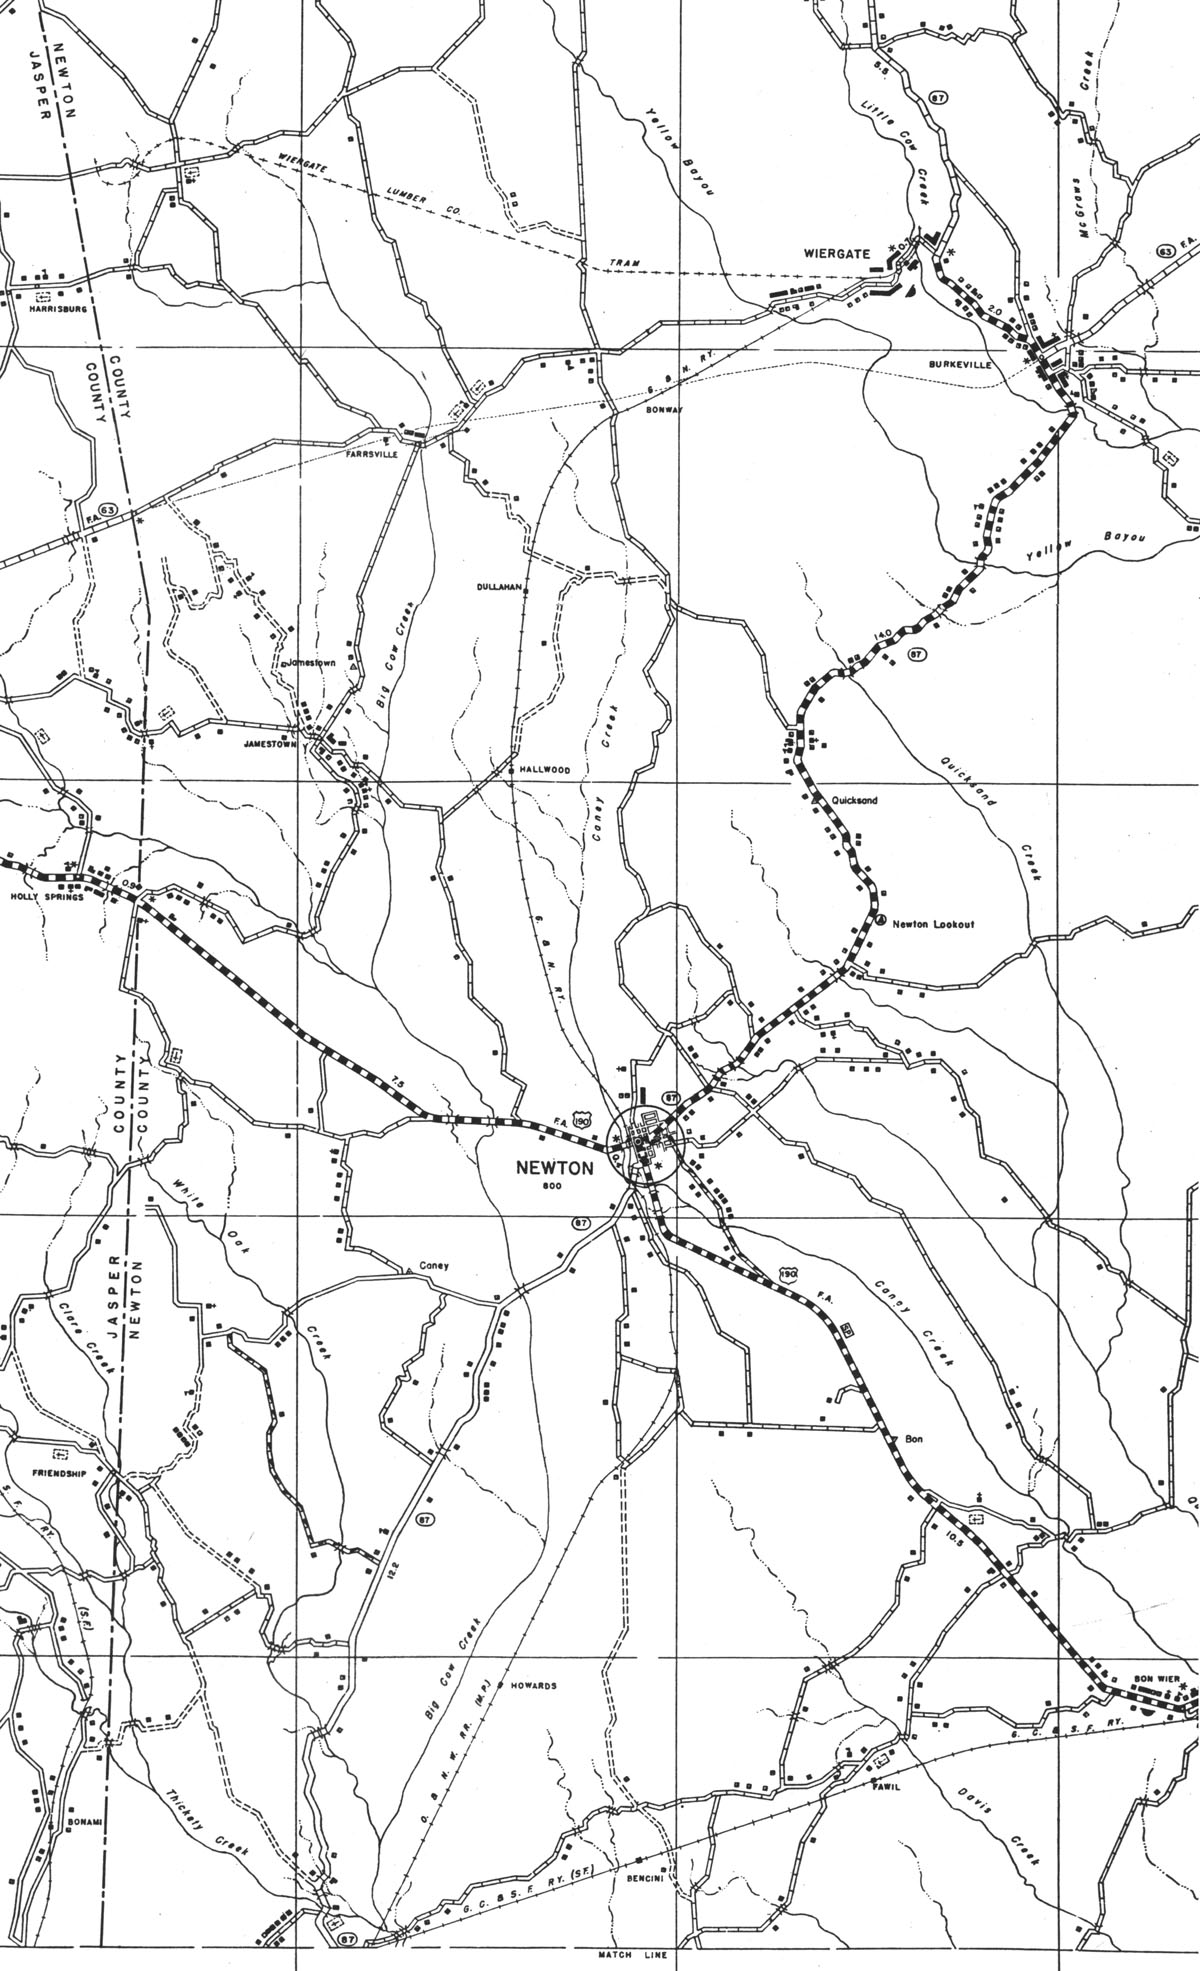 Gulf & Northern Railroad Company, Wier Long Leaf Lumber Company (Tex.). Map showing G&N mainline and Wier Long Leaf tram in 1936.